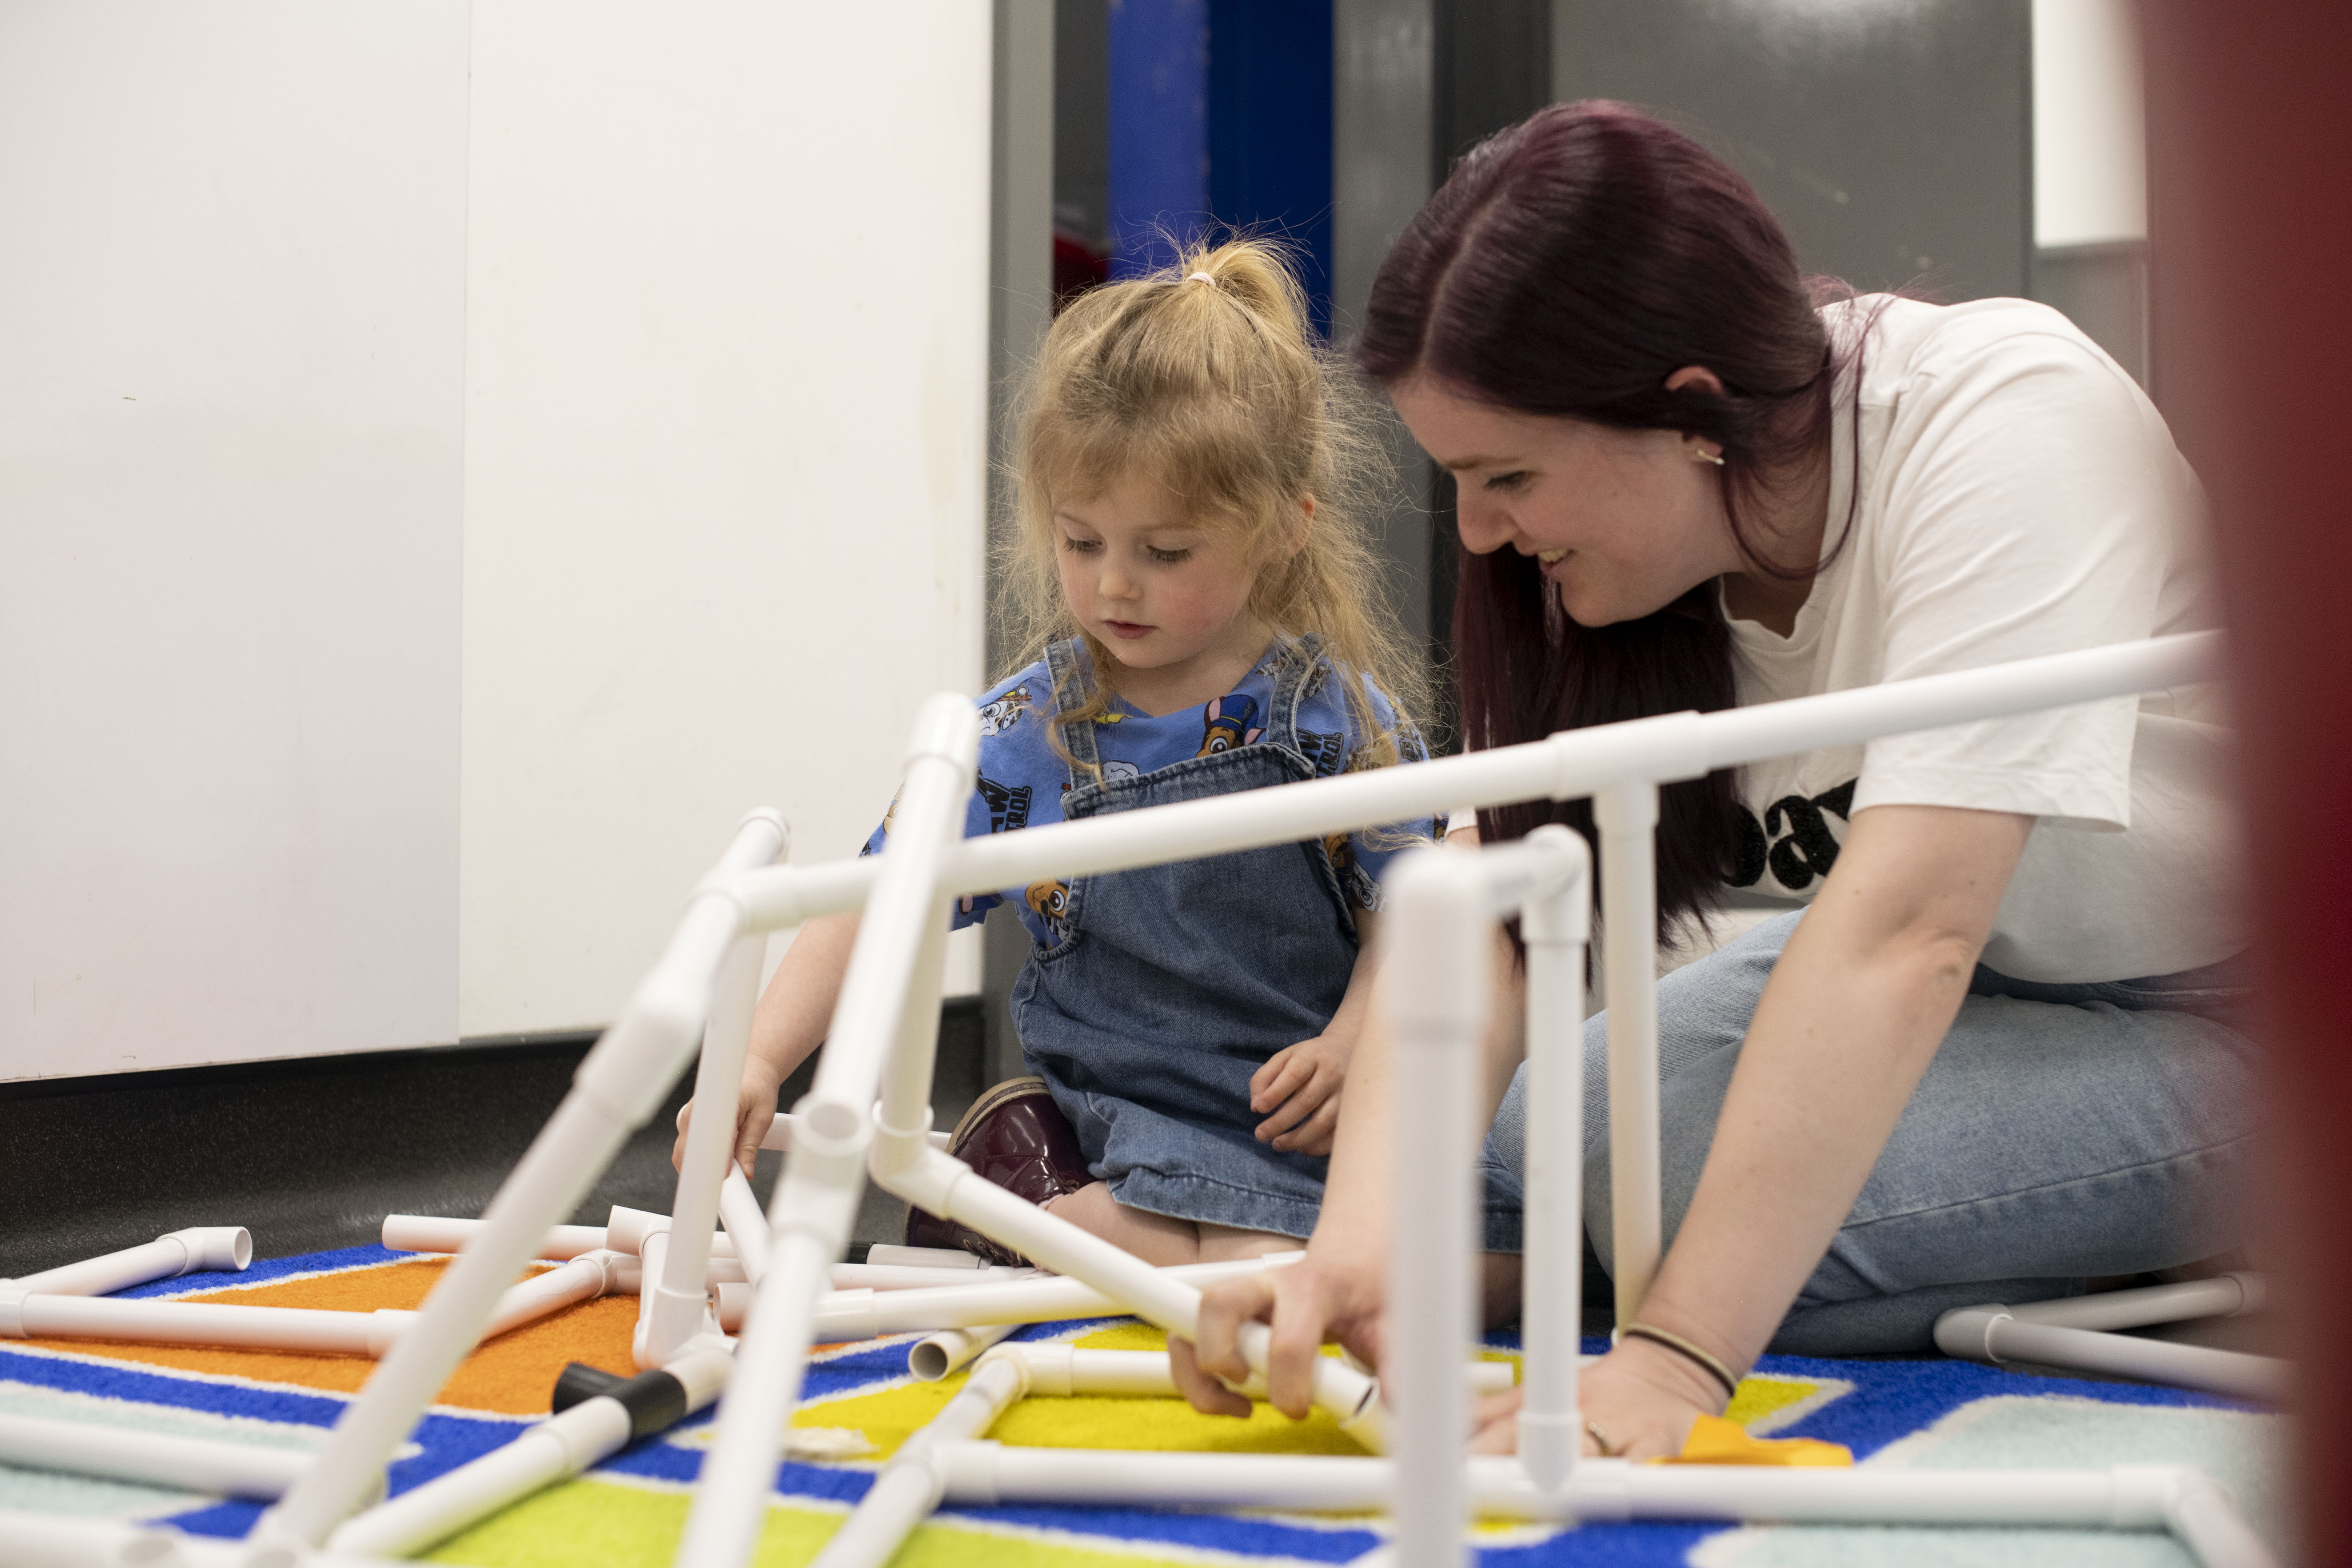 A woman and a little girl are building a structure with white plastic tubing